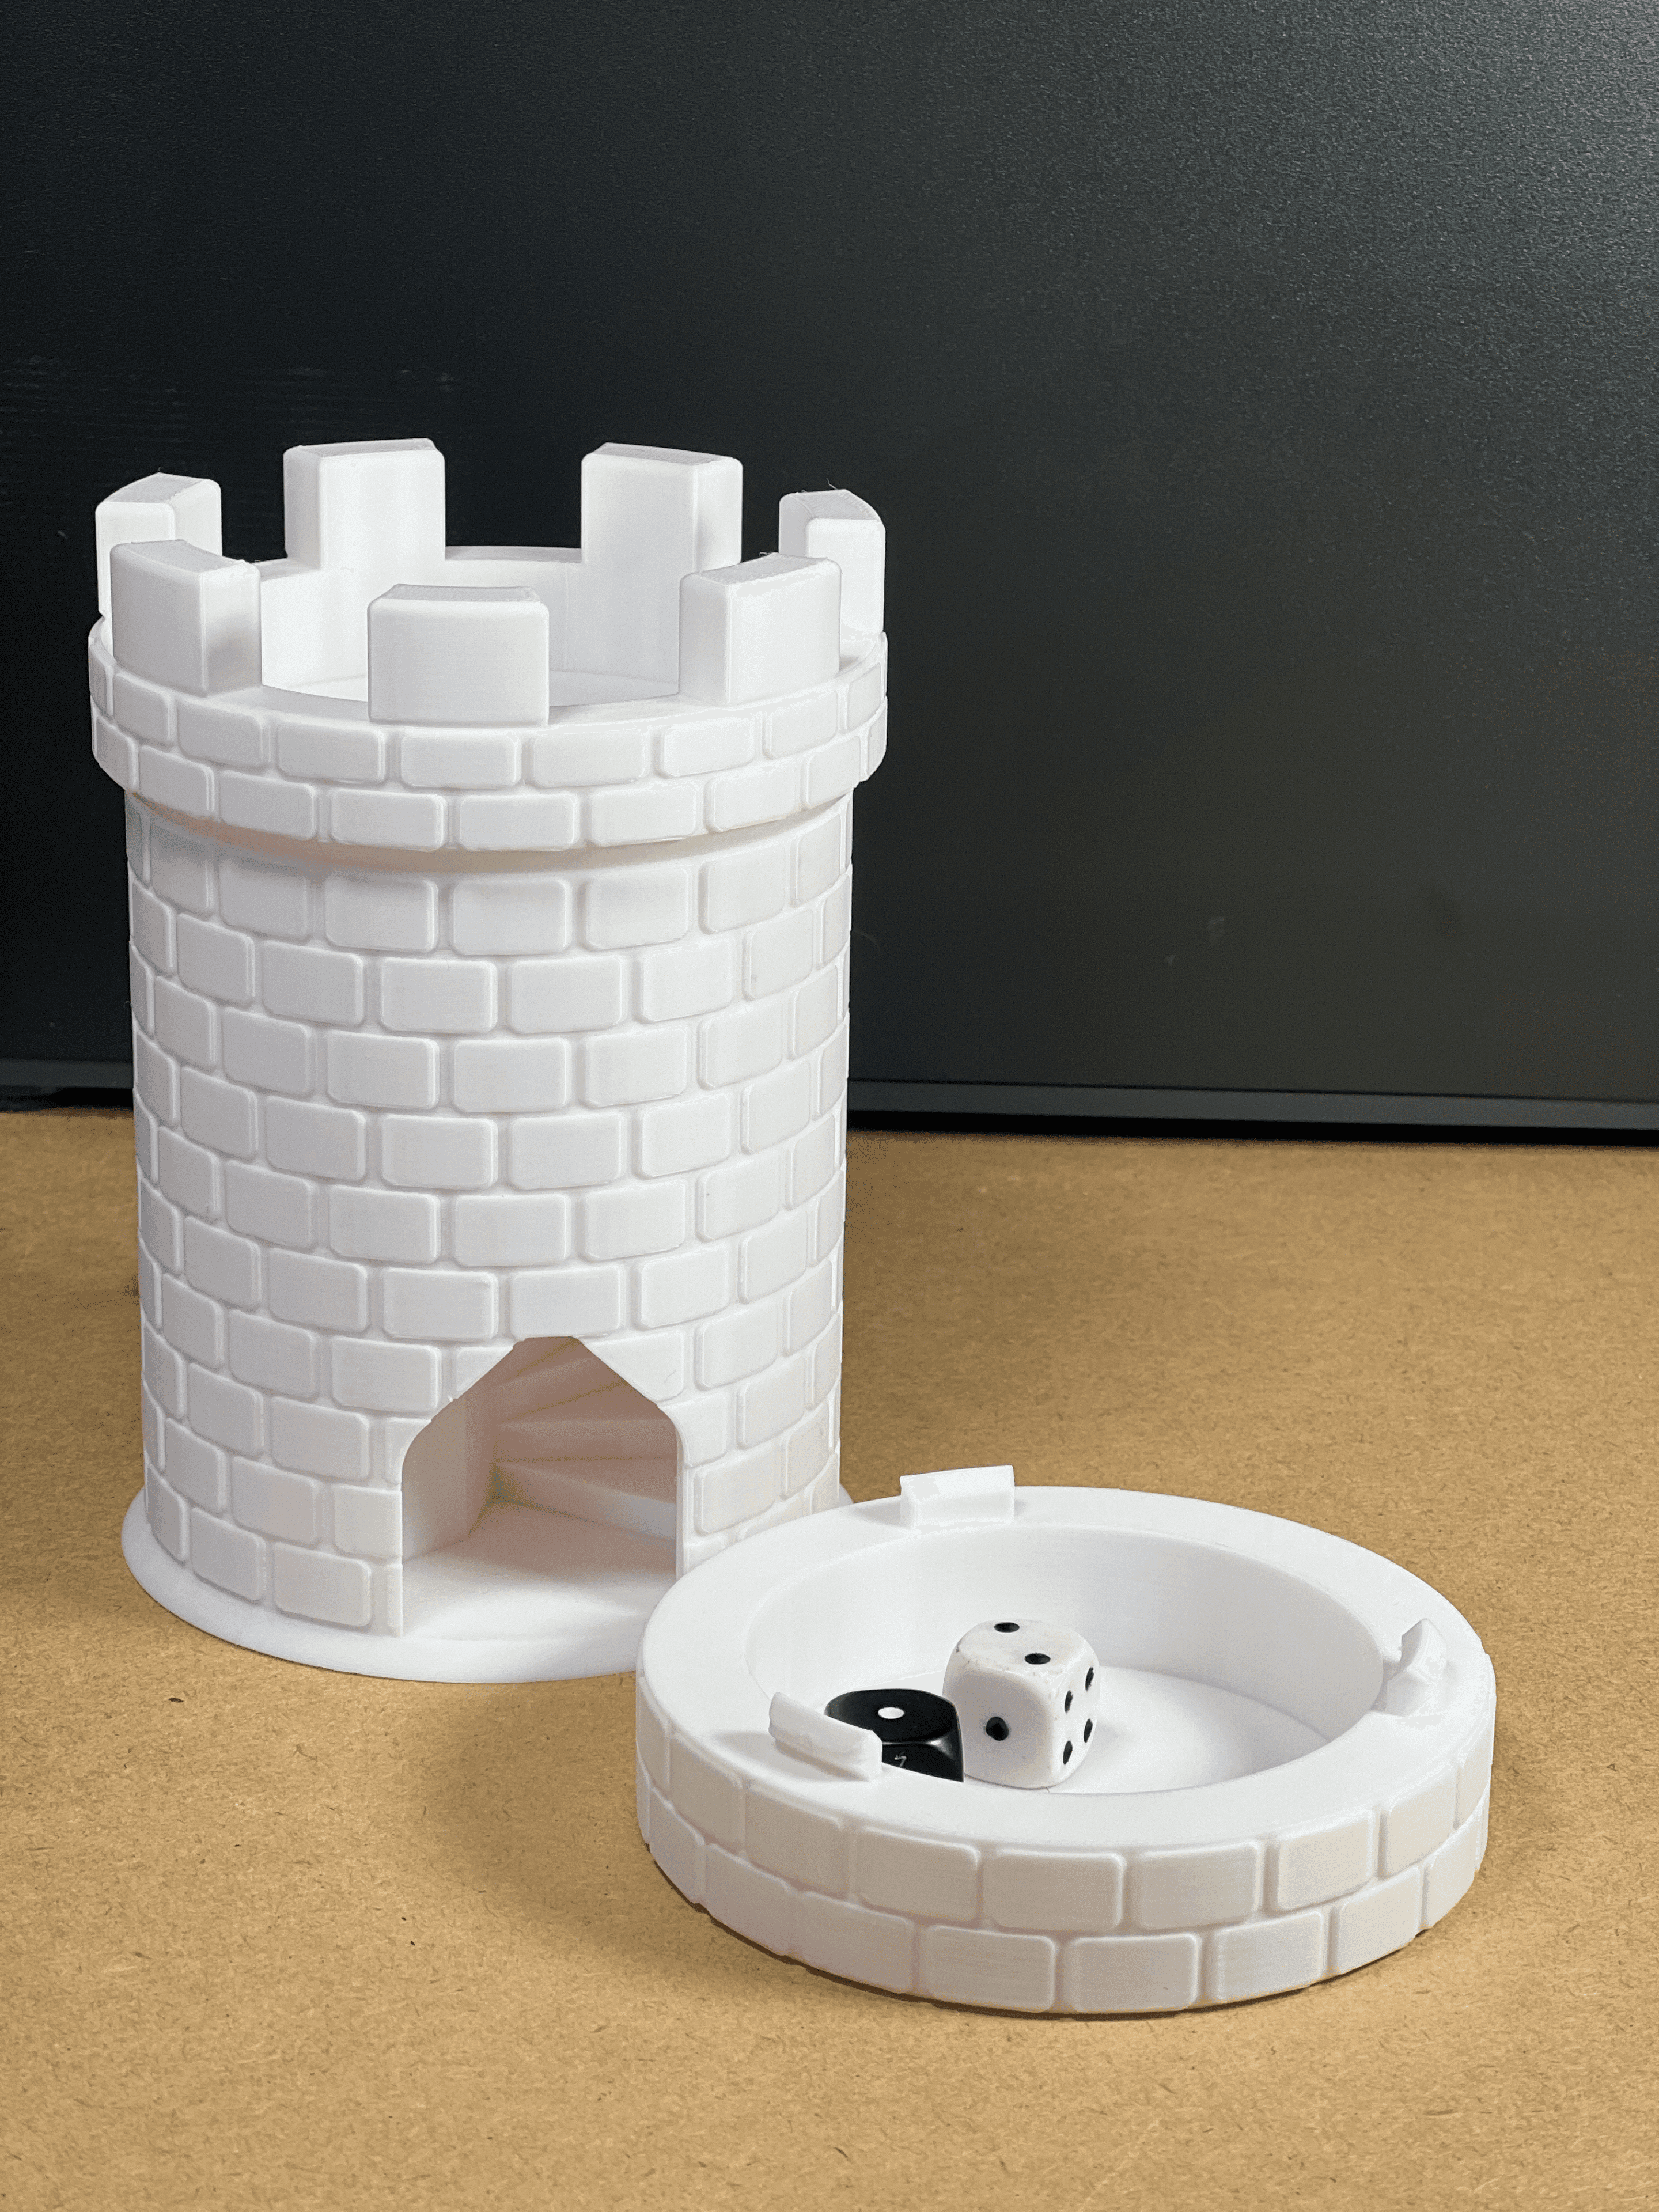 Turret Dice Tower With Hidden Storage Tray.  3d model